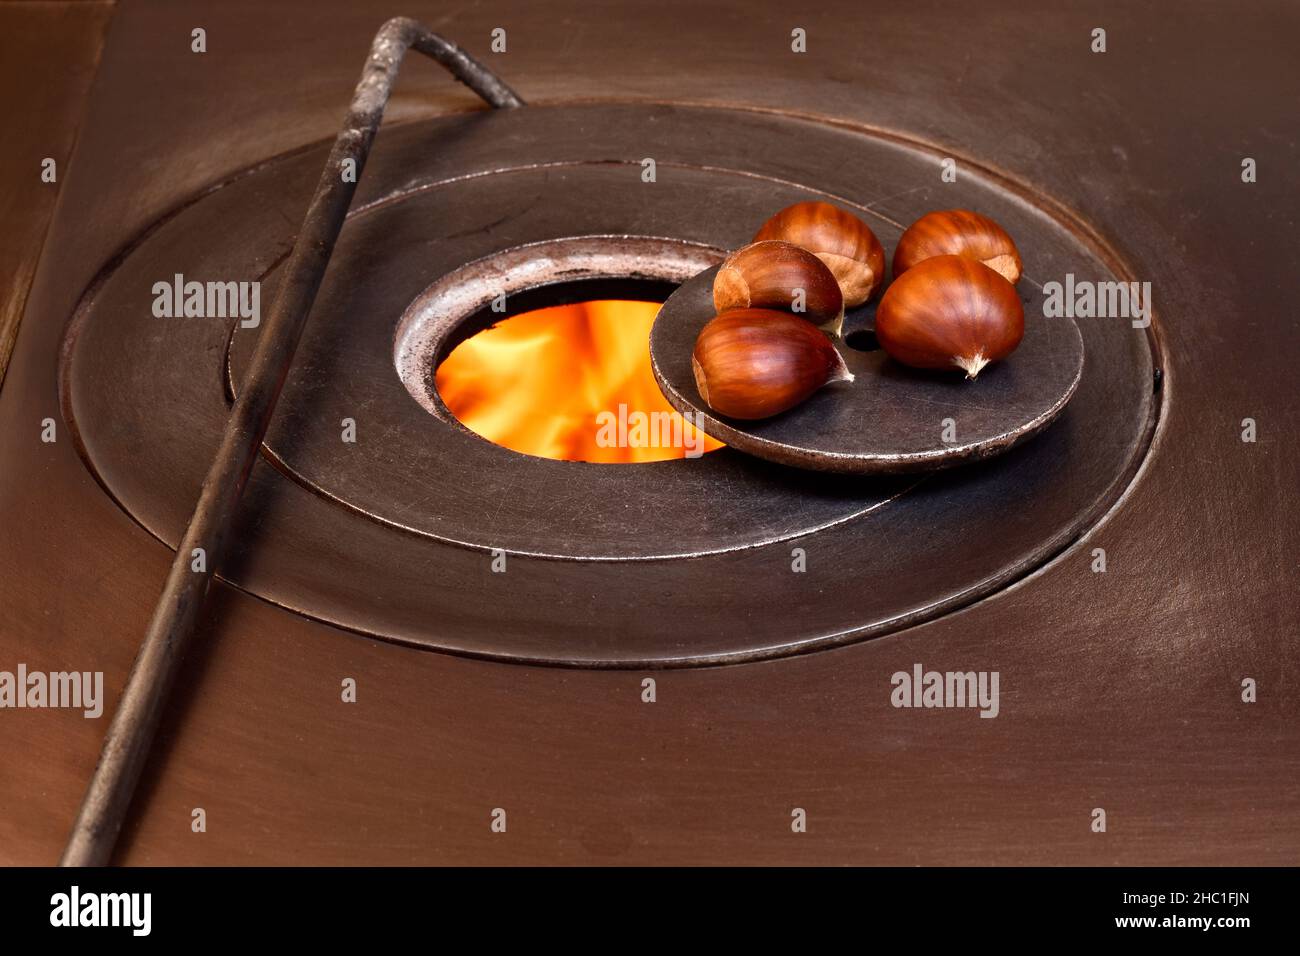 Close-up of five chestnuts on the fire of a wood stove.The photo represents something typical of the autumn season and is taken in horizontal format. Stock Photo